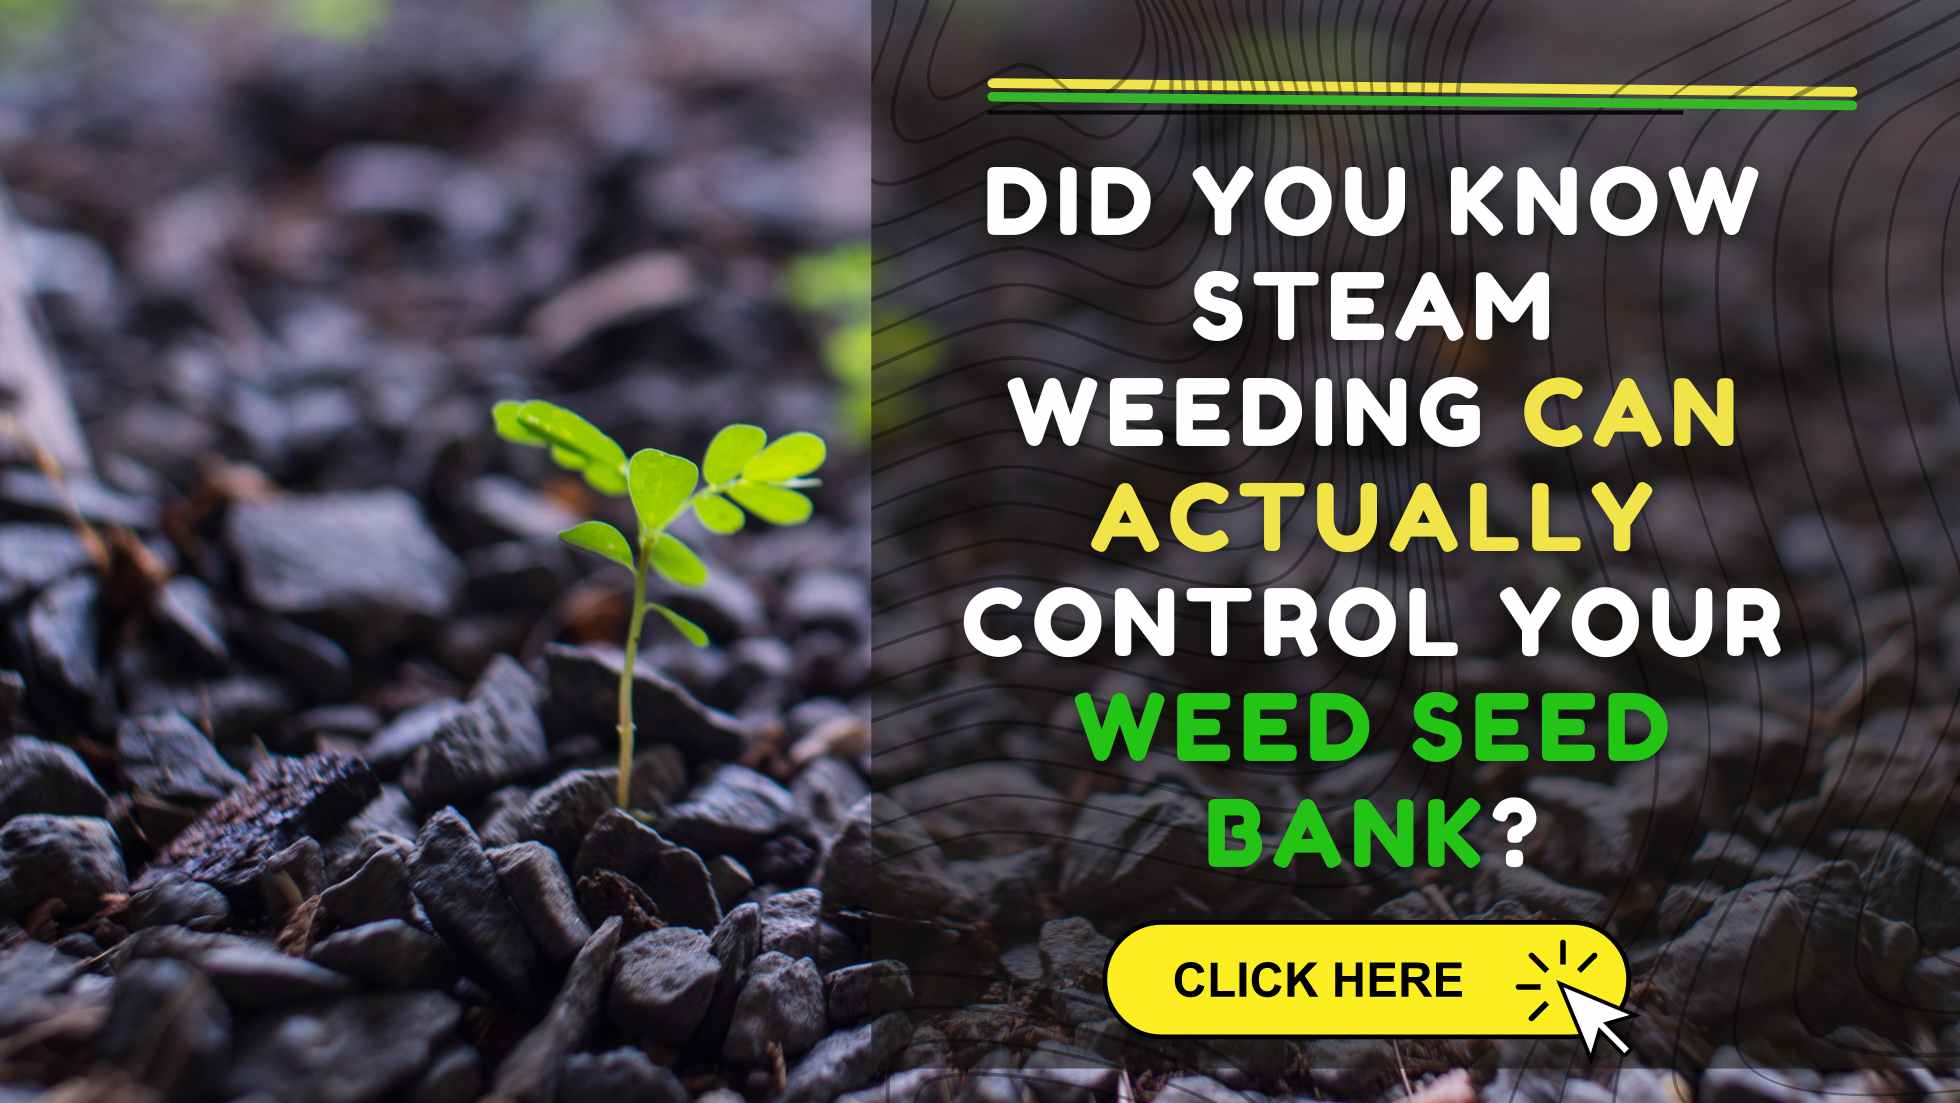 Steam weeding eradicates weed seed bank - a blog about this topic